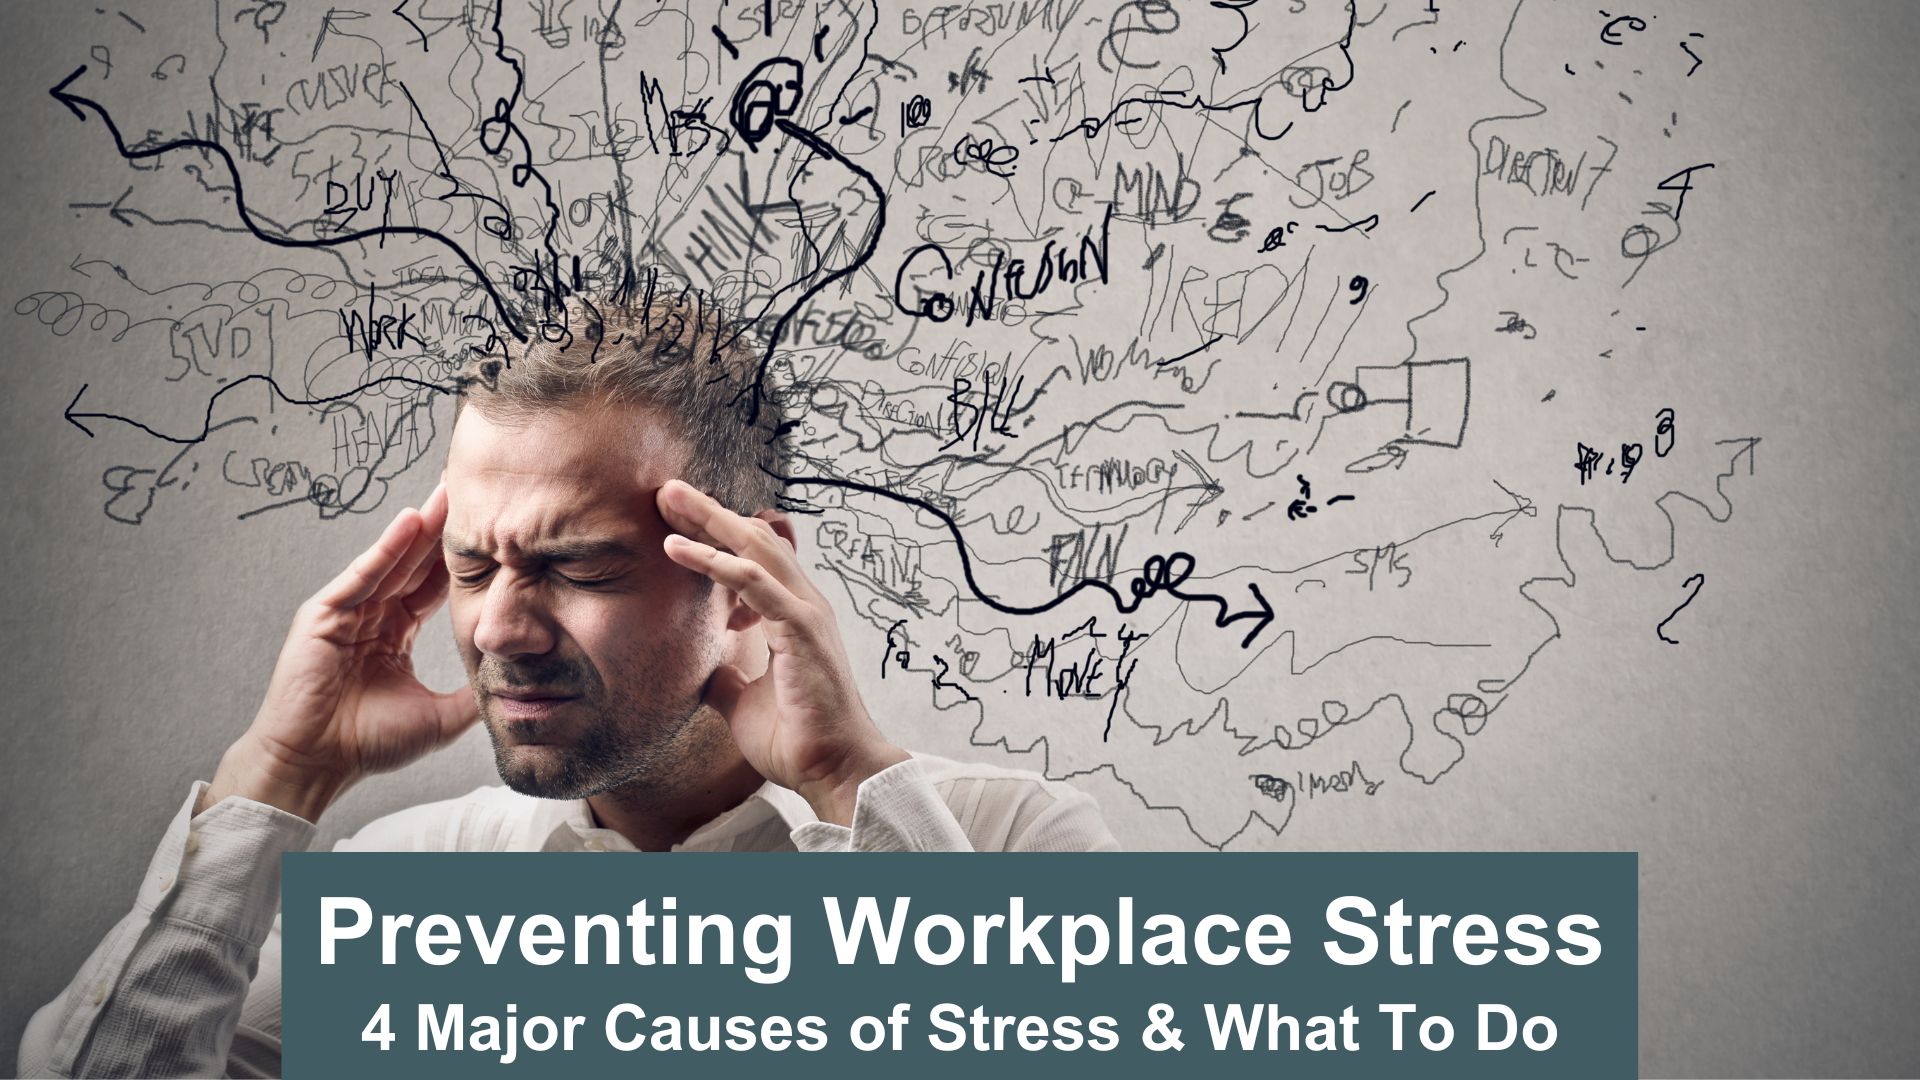 Preventing workplace stress - 4 major causes of stress at work and what to do